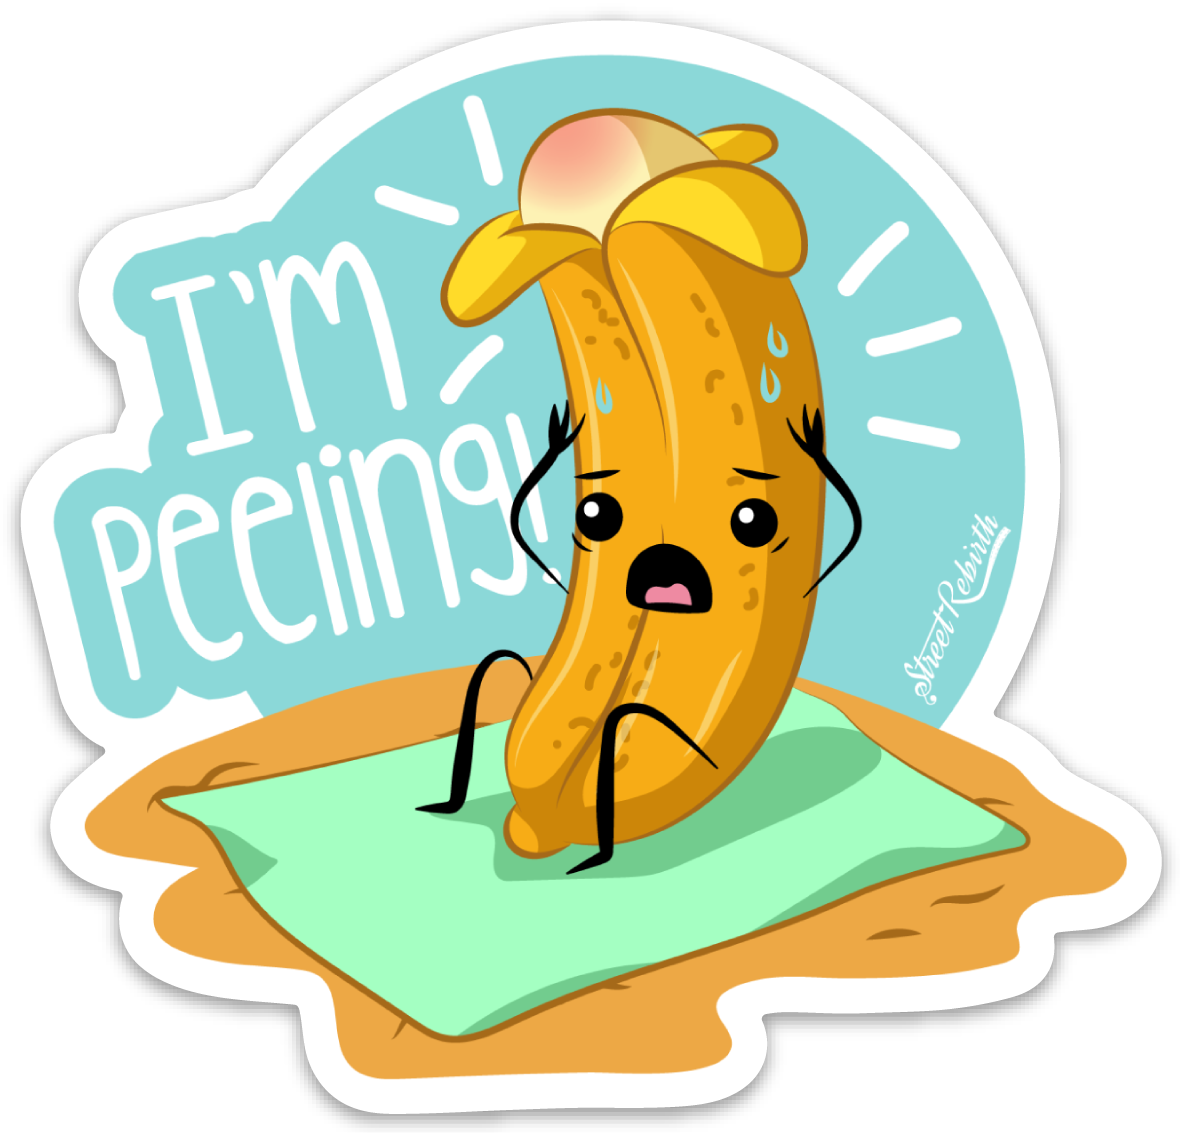 I'm peeling! PUN STICKER – ONE 4 INCH WATER PROOF VINYL STICKER – FOR HYDRO FLASK, SKATEBOARD, LAPTOP, PLANNER, CAR, COLLECTING, GIFTING